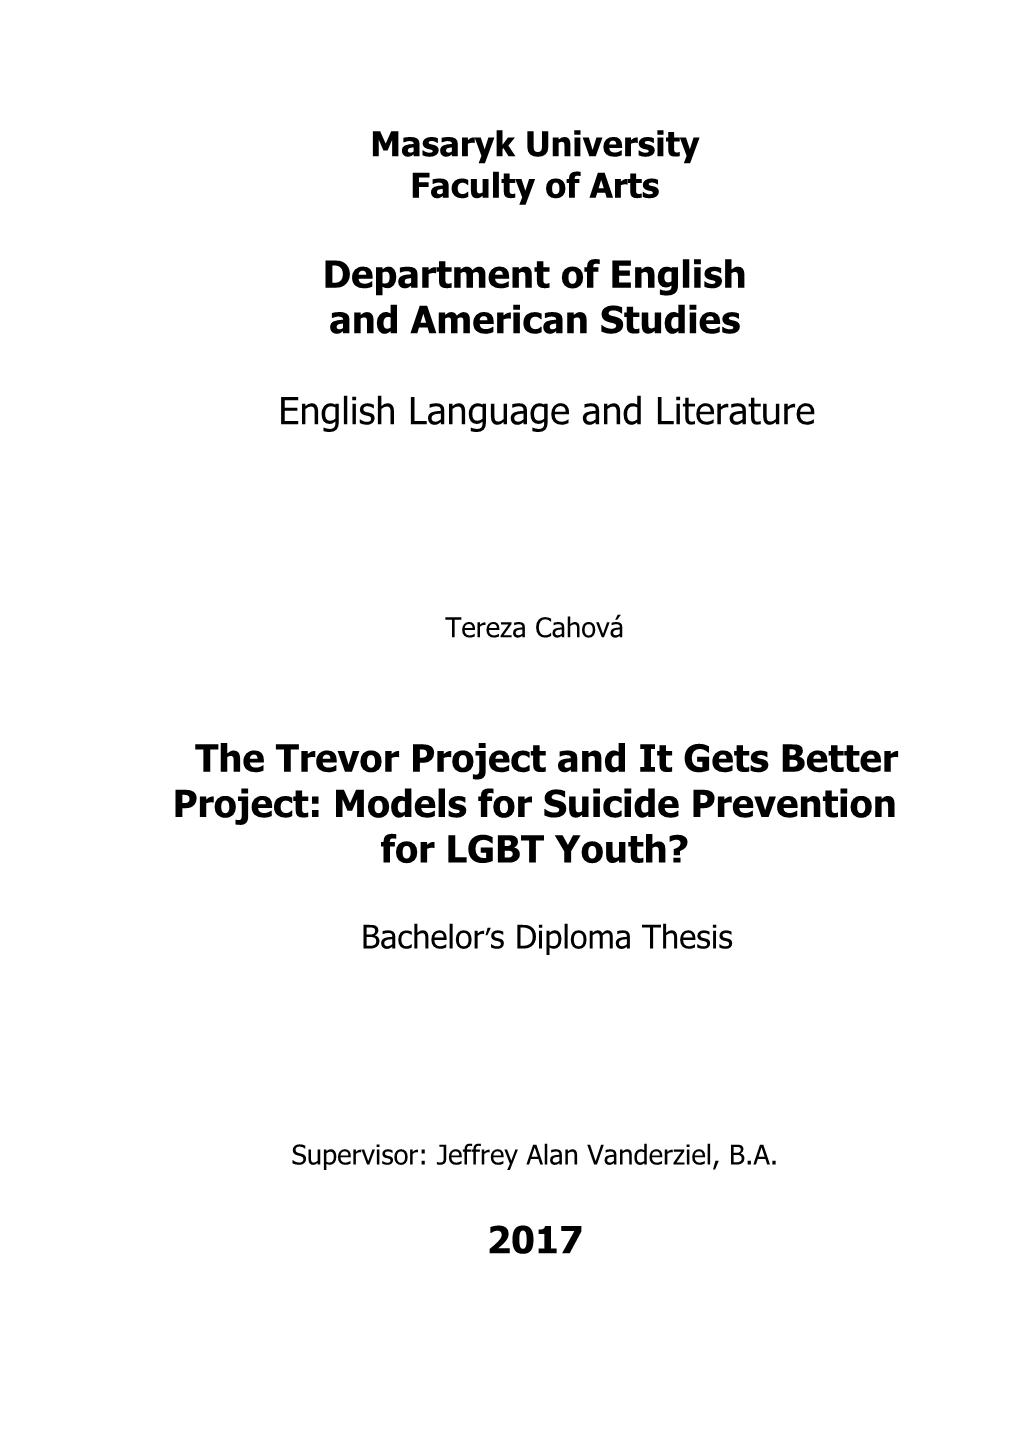 The Trevor Project and It Gets Better Project: Models for Suicide Prevention for LGBT Youth?